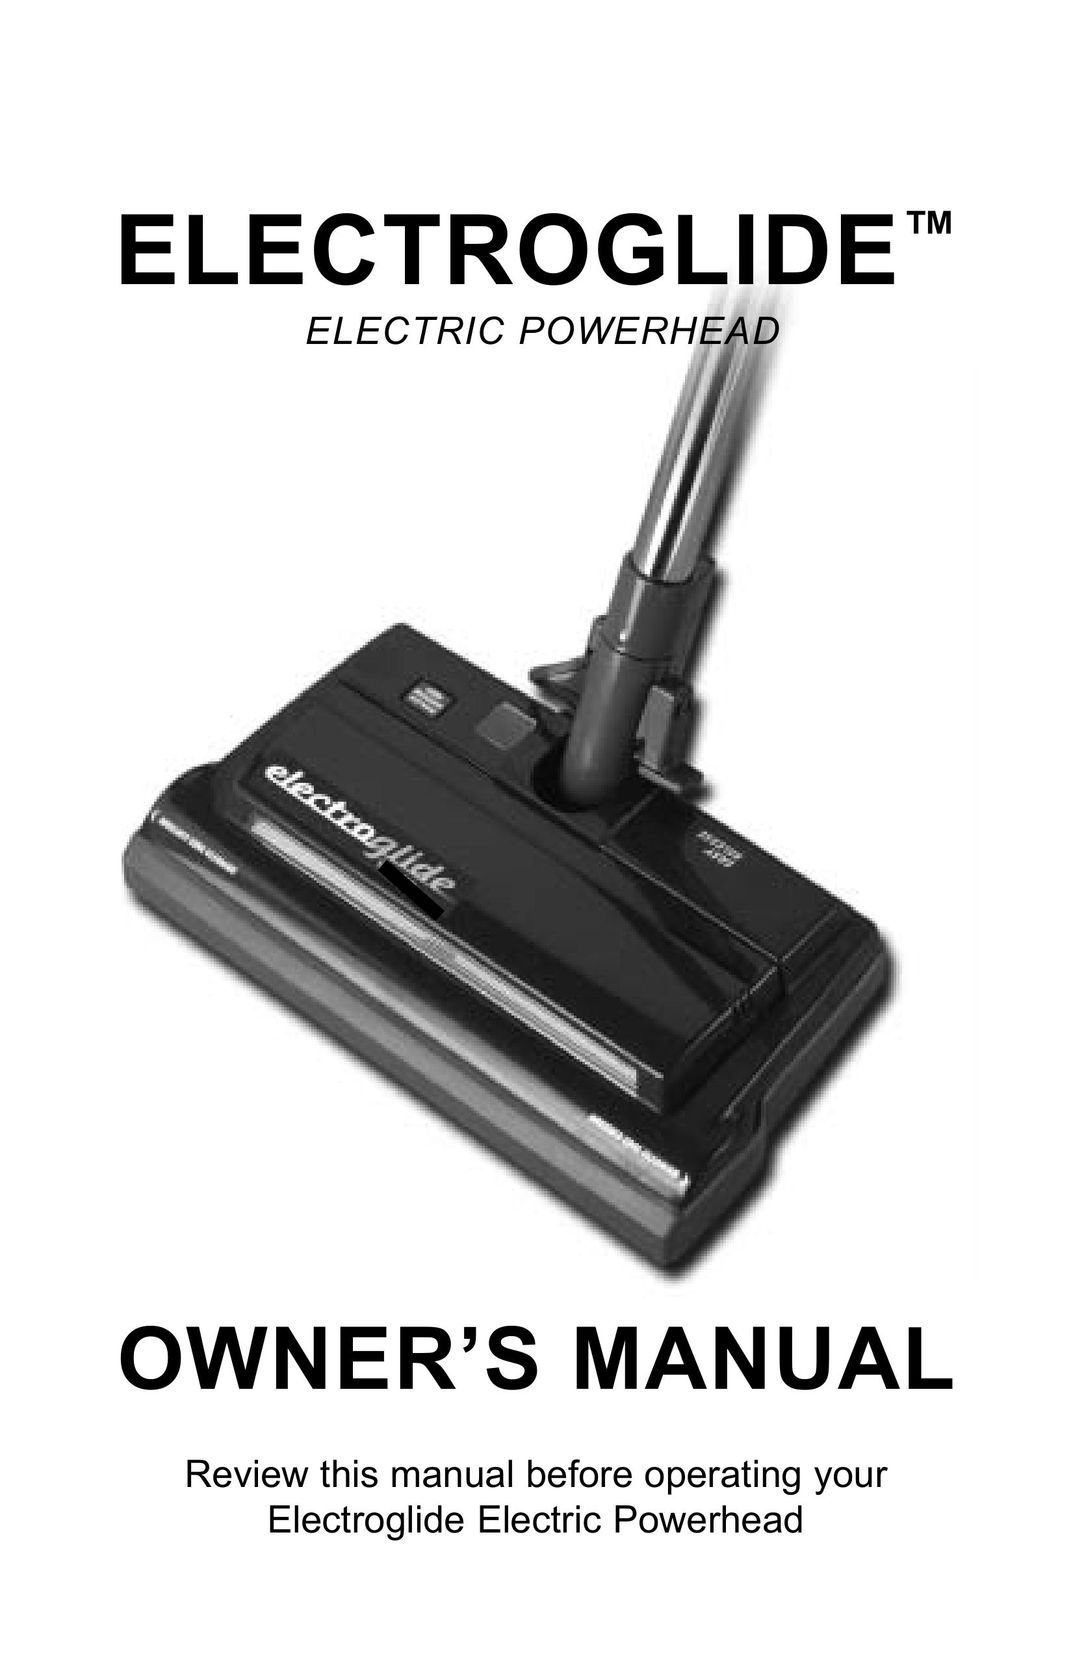 H-P Products Electroglide Vacuum Cleaner User Manual